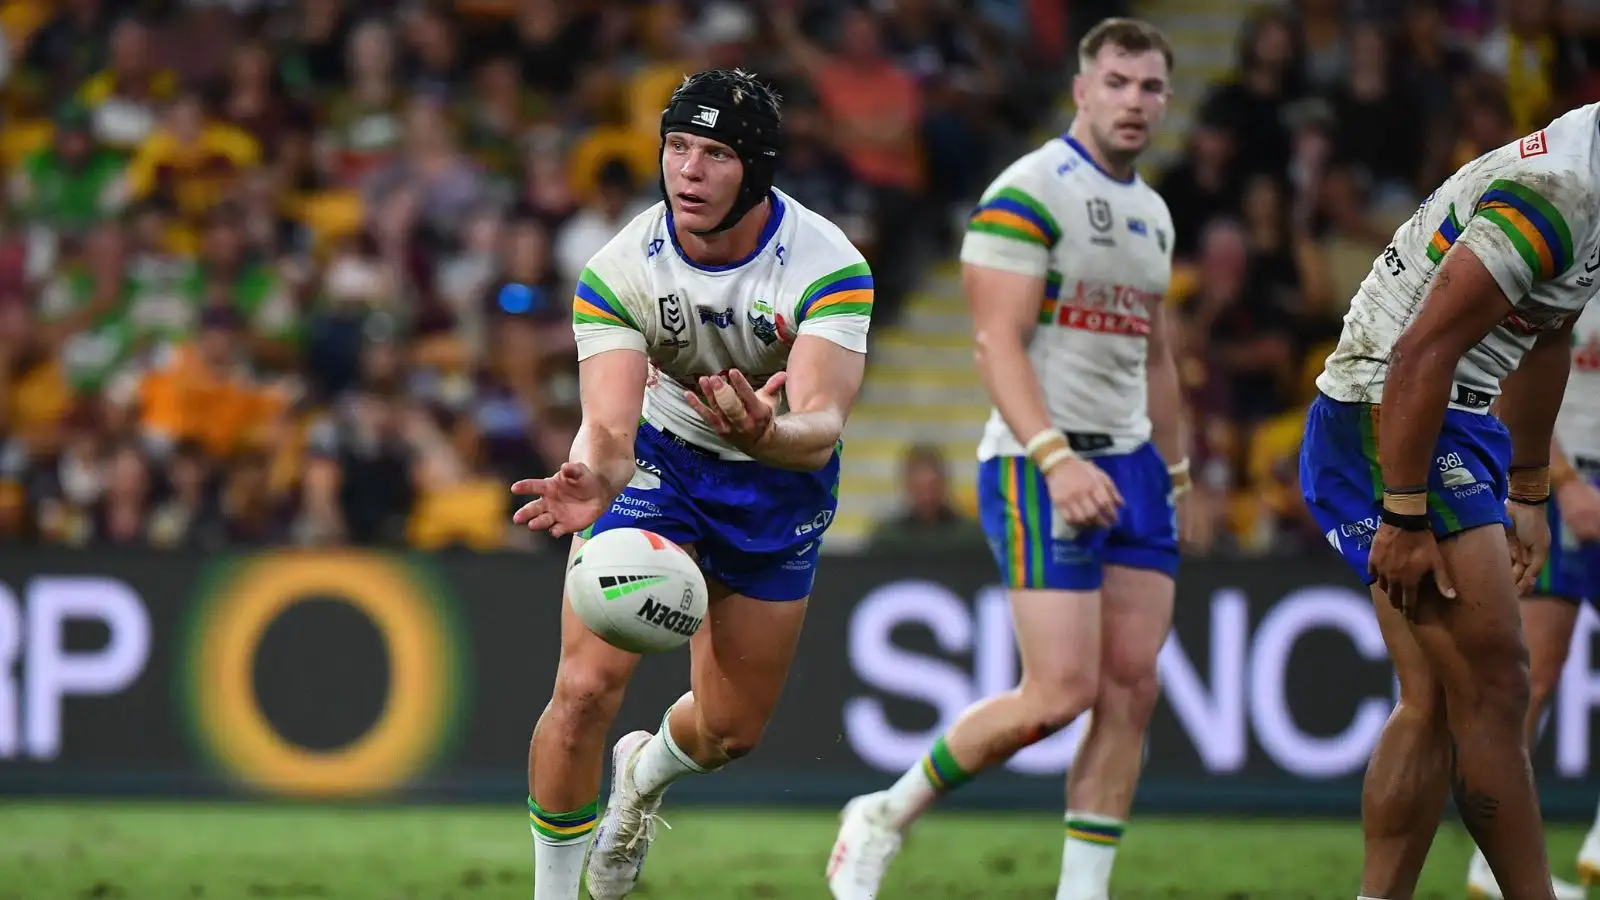 Hull KR transfer news: Brad Schneider departs Canberra Raiders with ‘best wishes’ ahead of Super League move